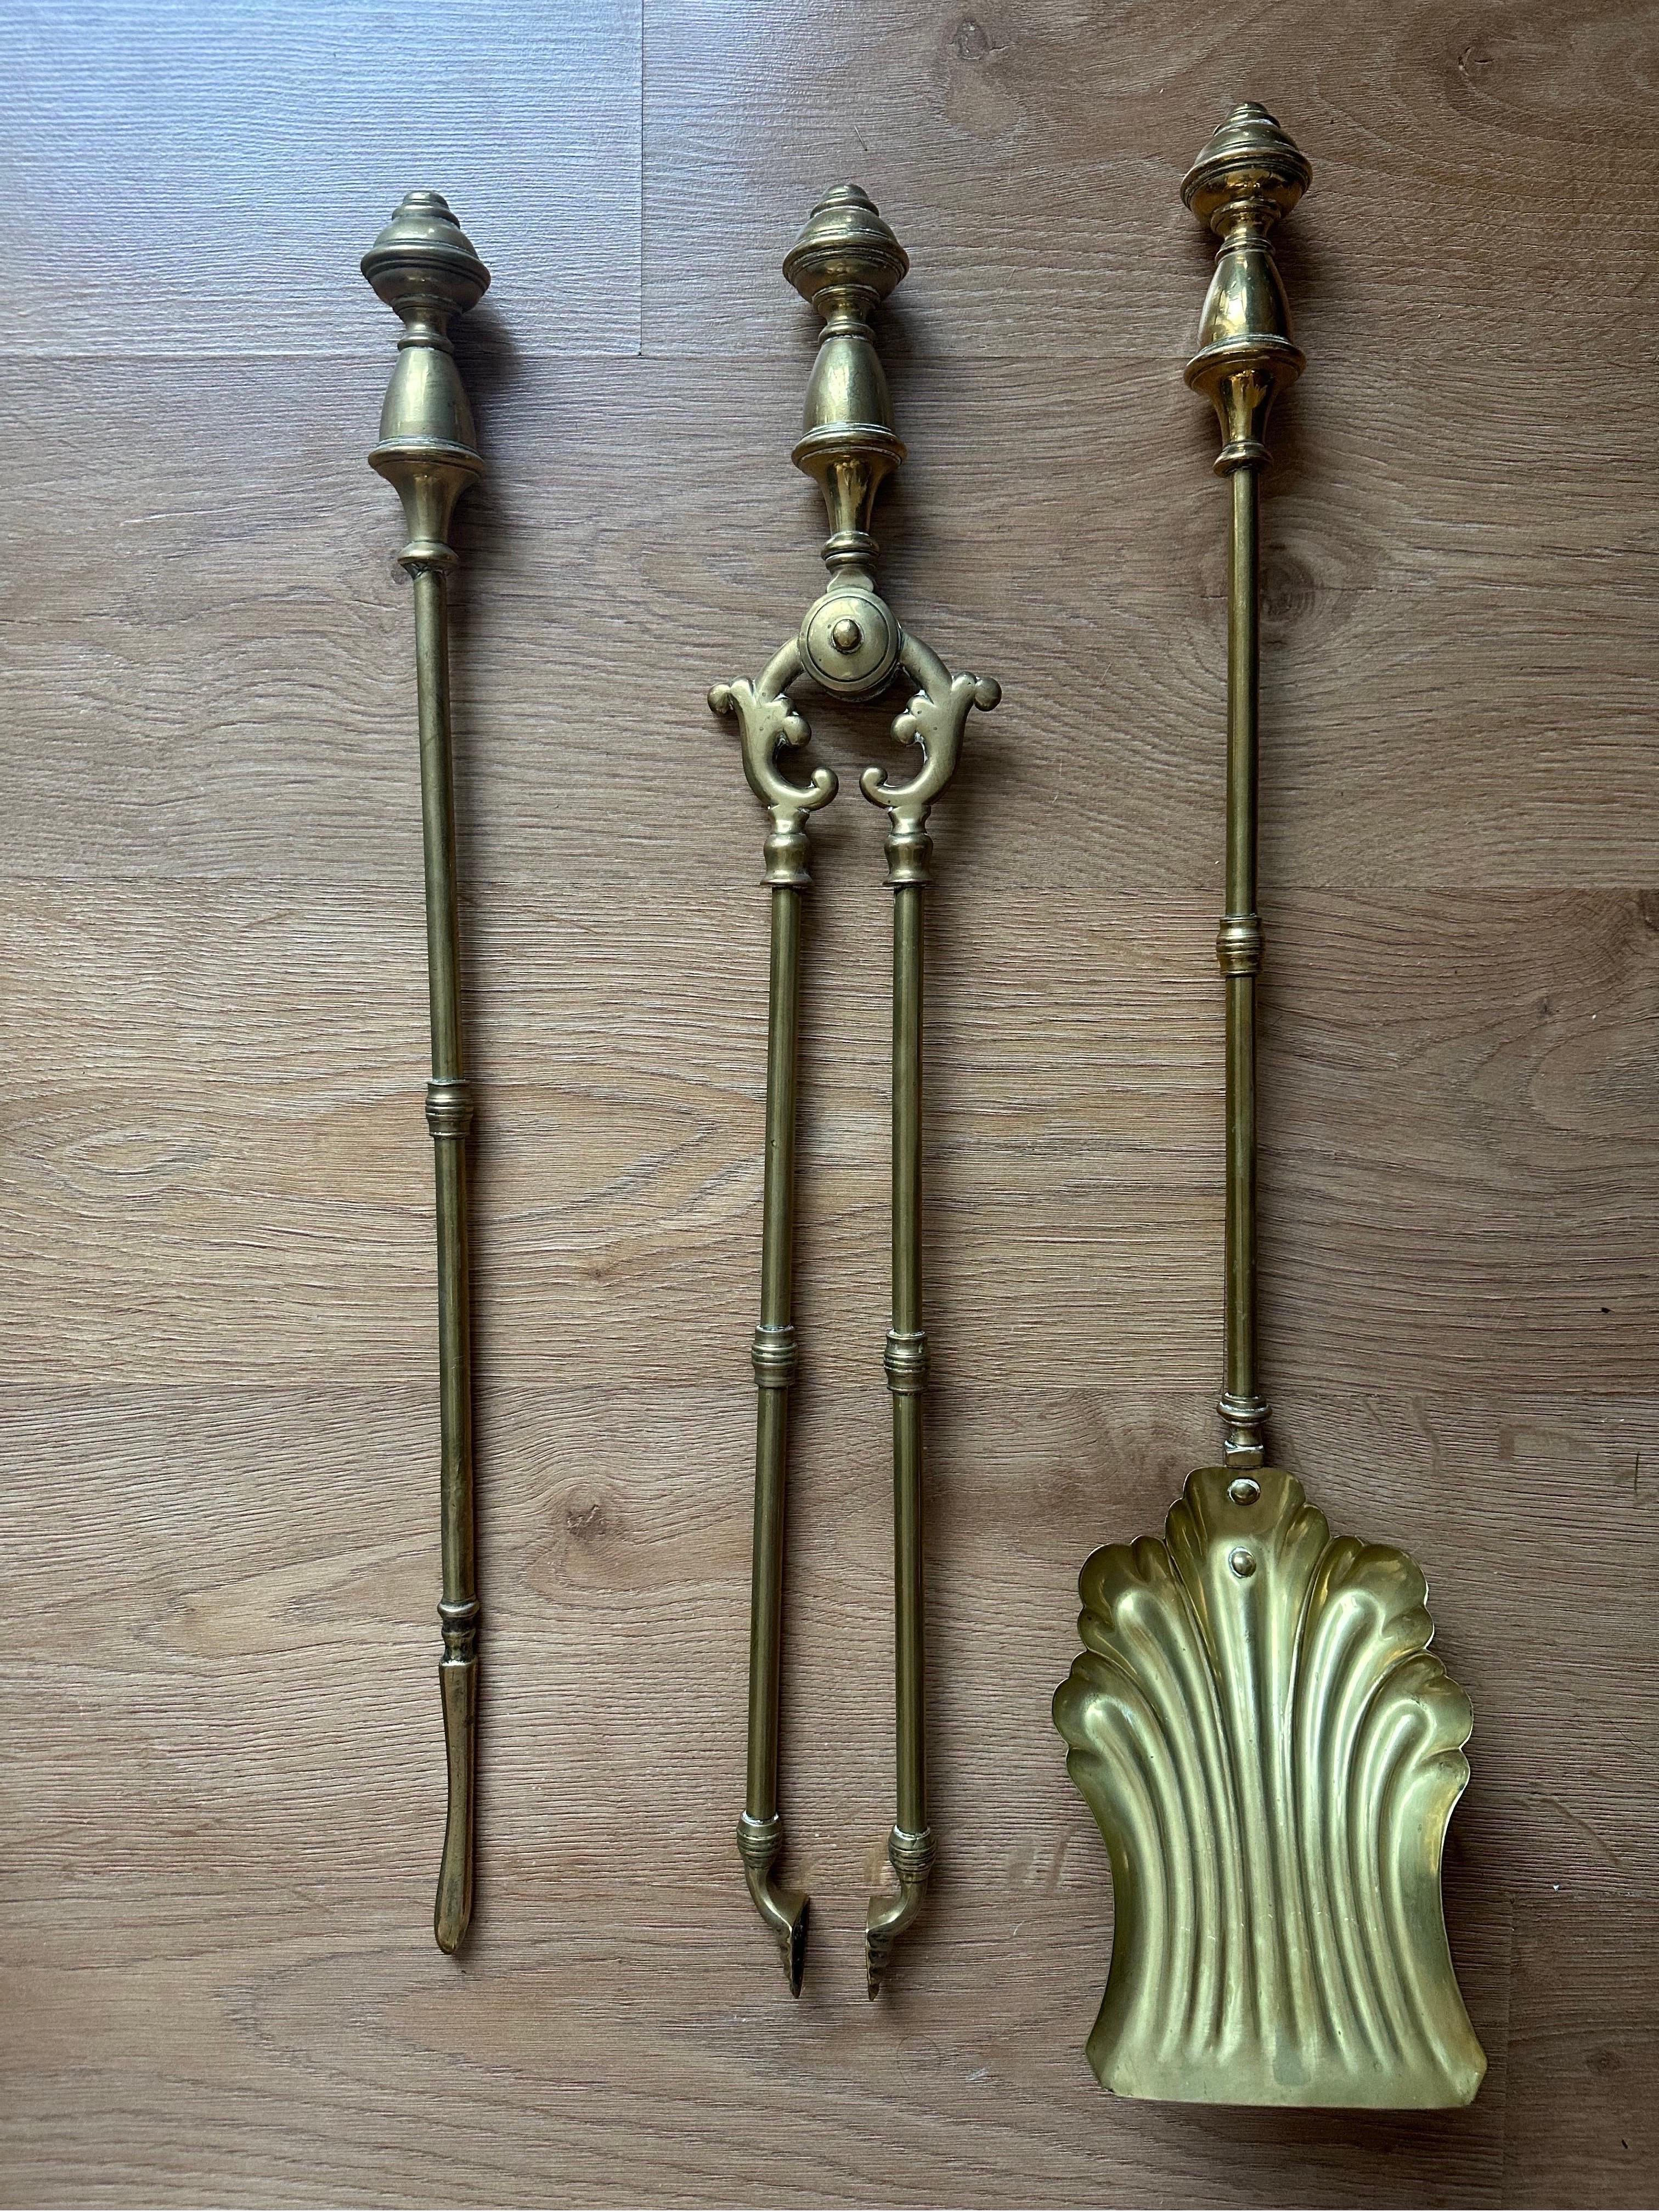 A beautiful set of antique Victorian solid brass fire companion tools. The superb set is solid brass, with beautiful twirl top motif. Beautiful patina throughout the set. With matching the elegant yet powerful impression the set provides. This is